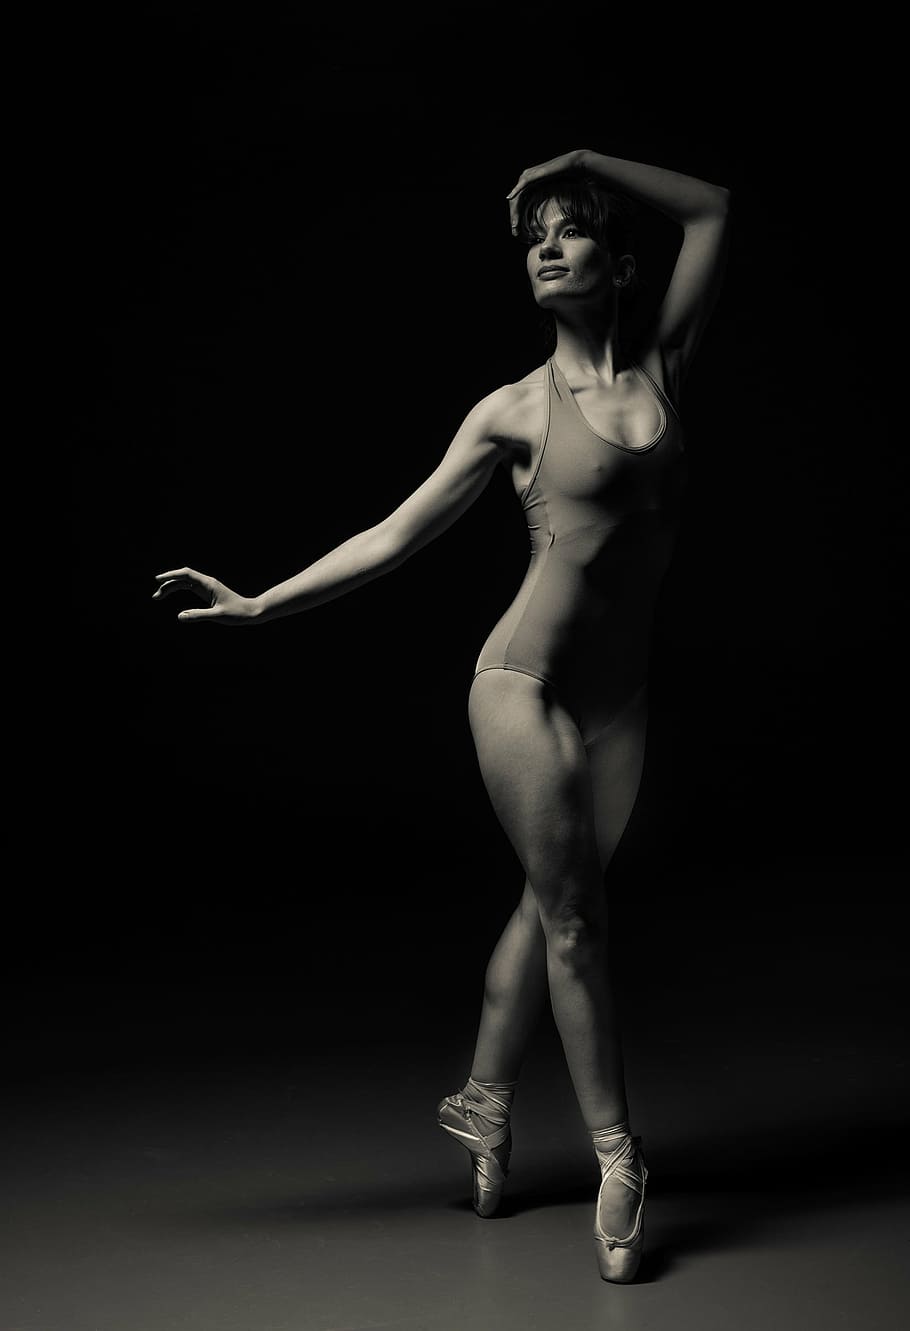 woman, ballerina post, grayscale, wearing, gray, leotards, people, dancing, dancer, black and white